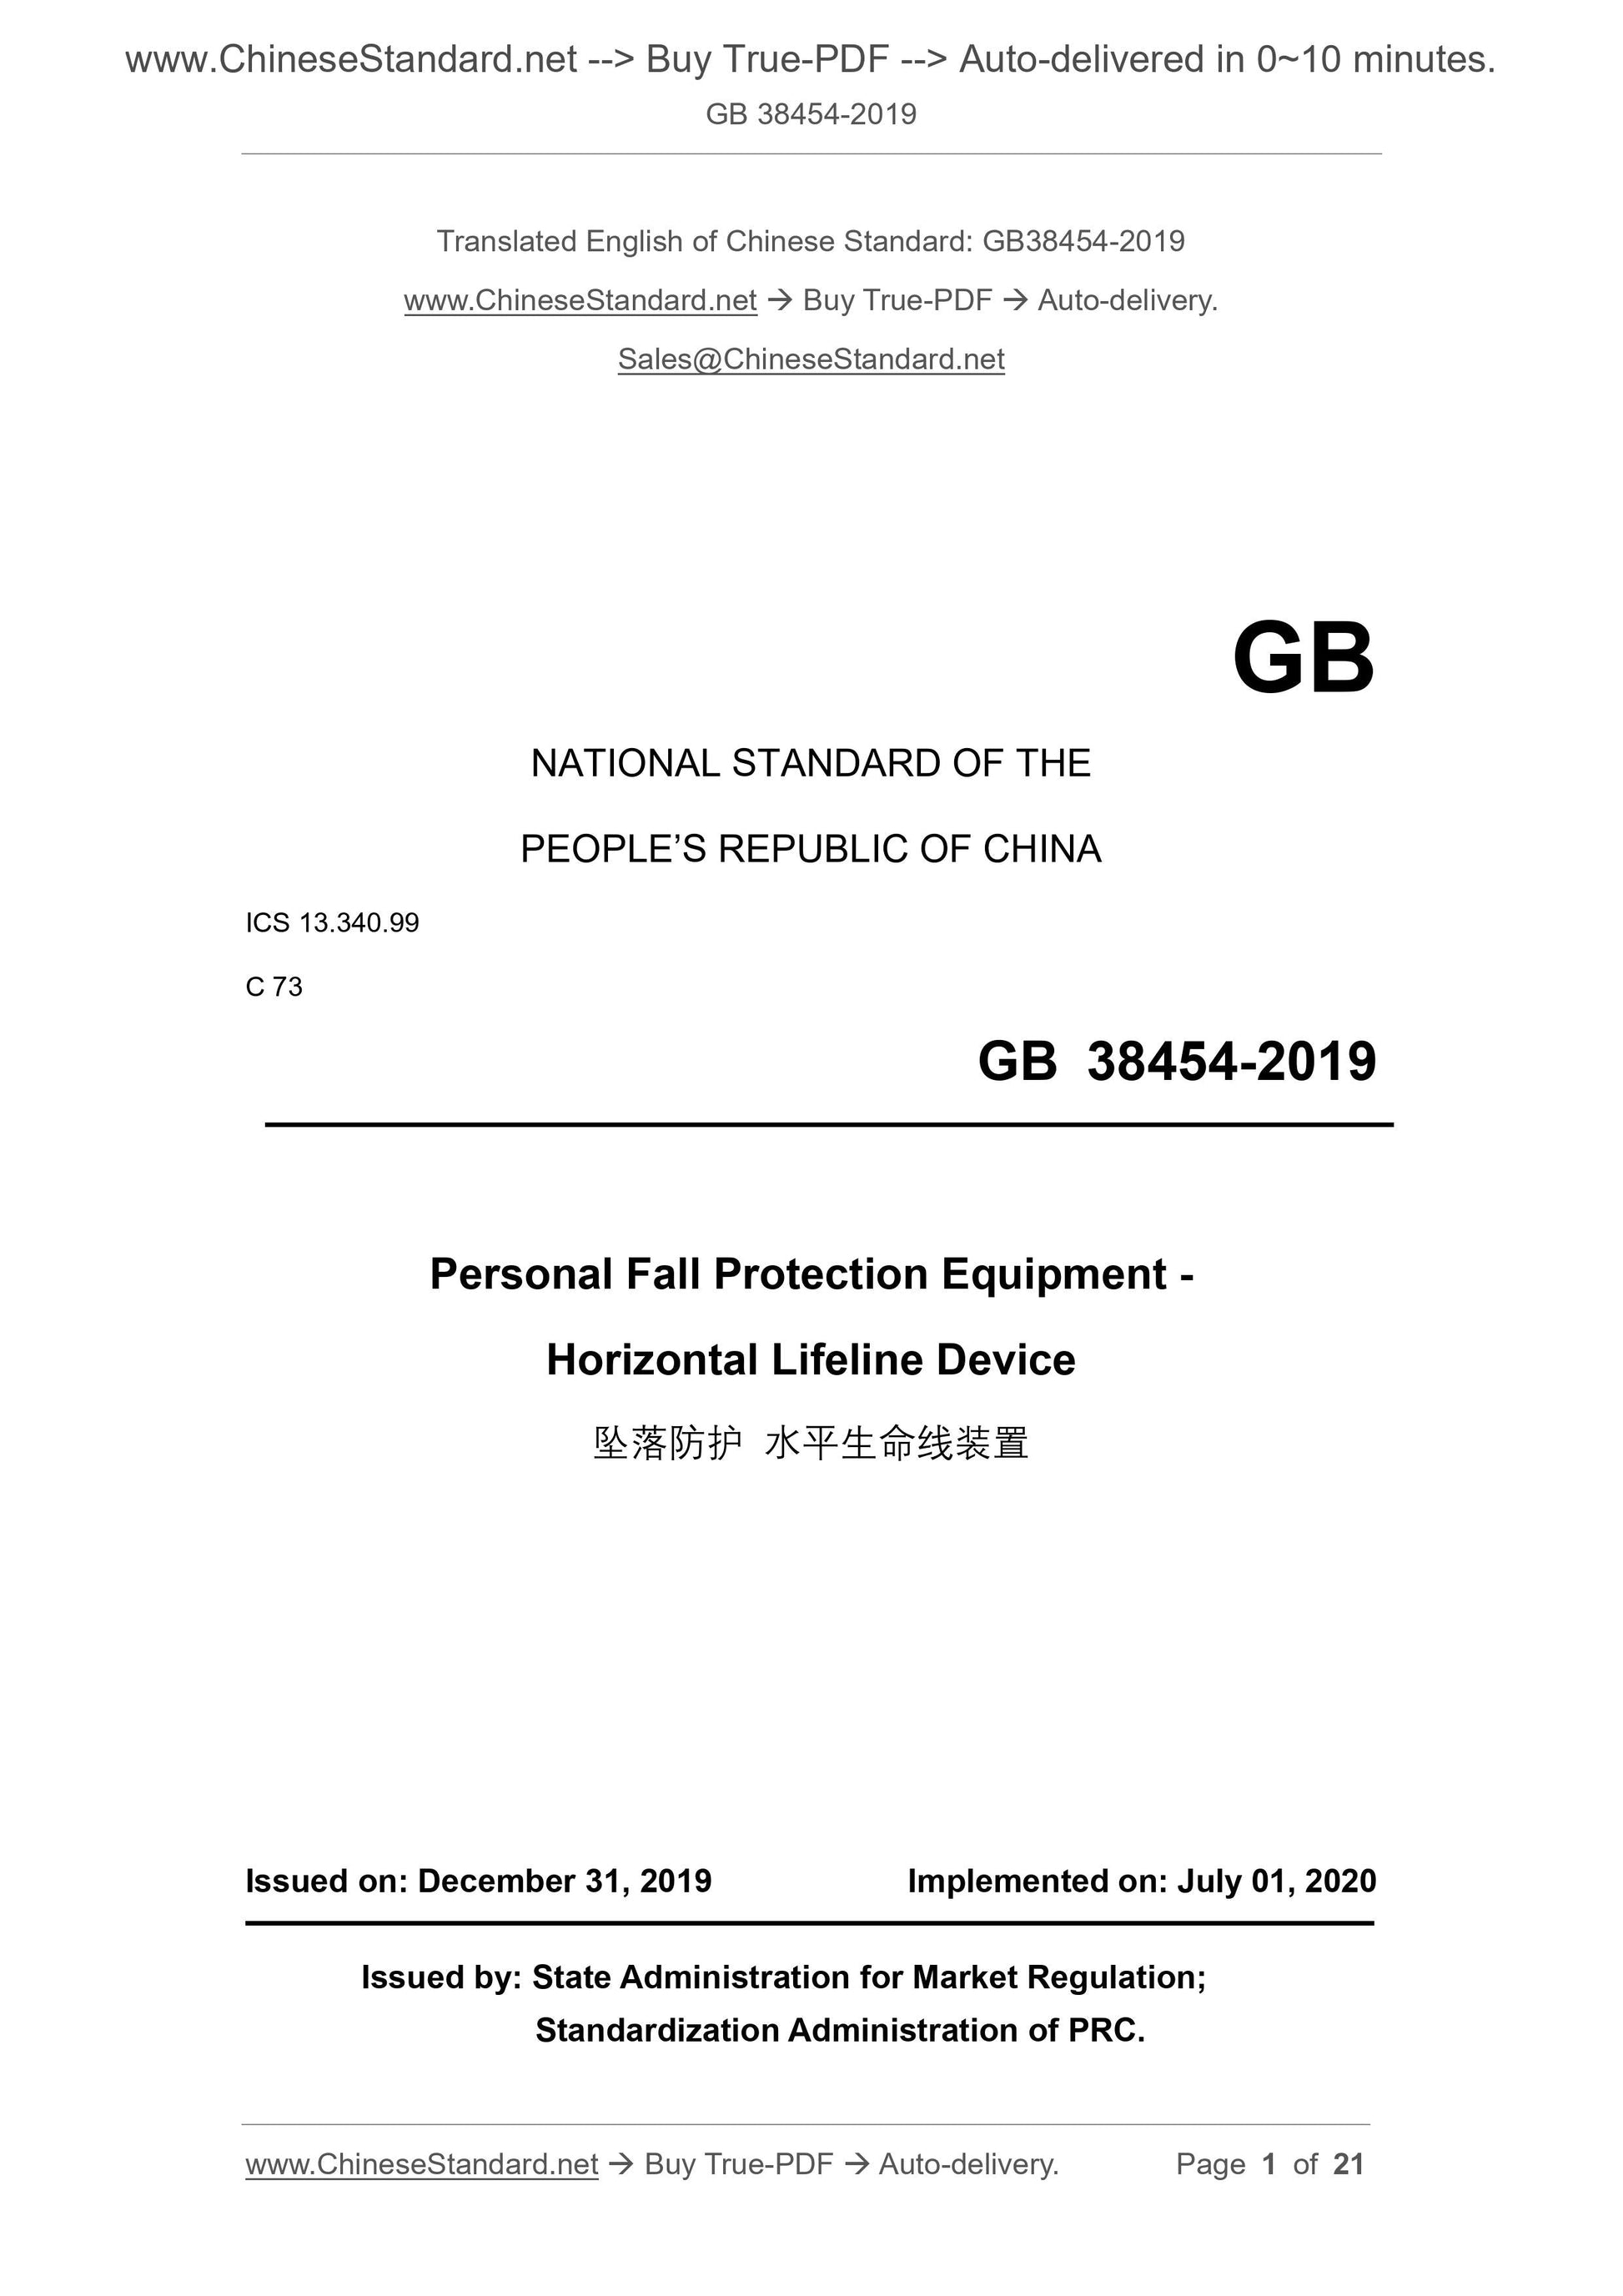 GB 38454-2019 Page 1